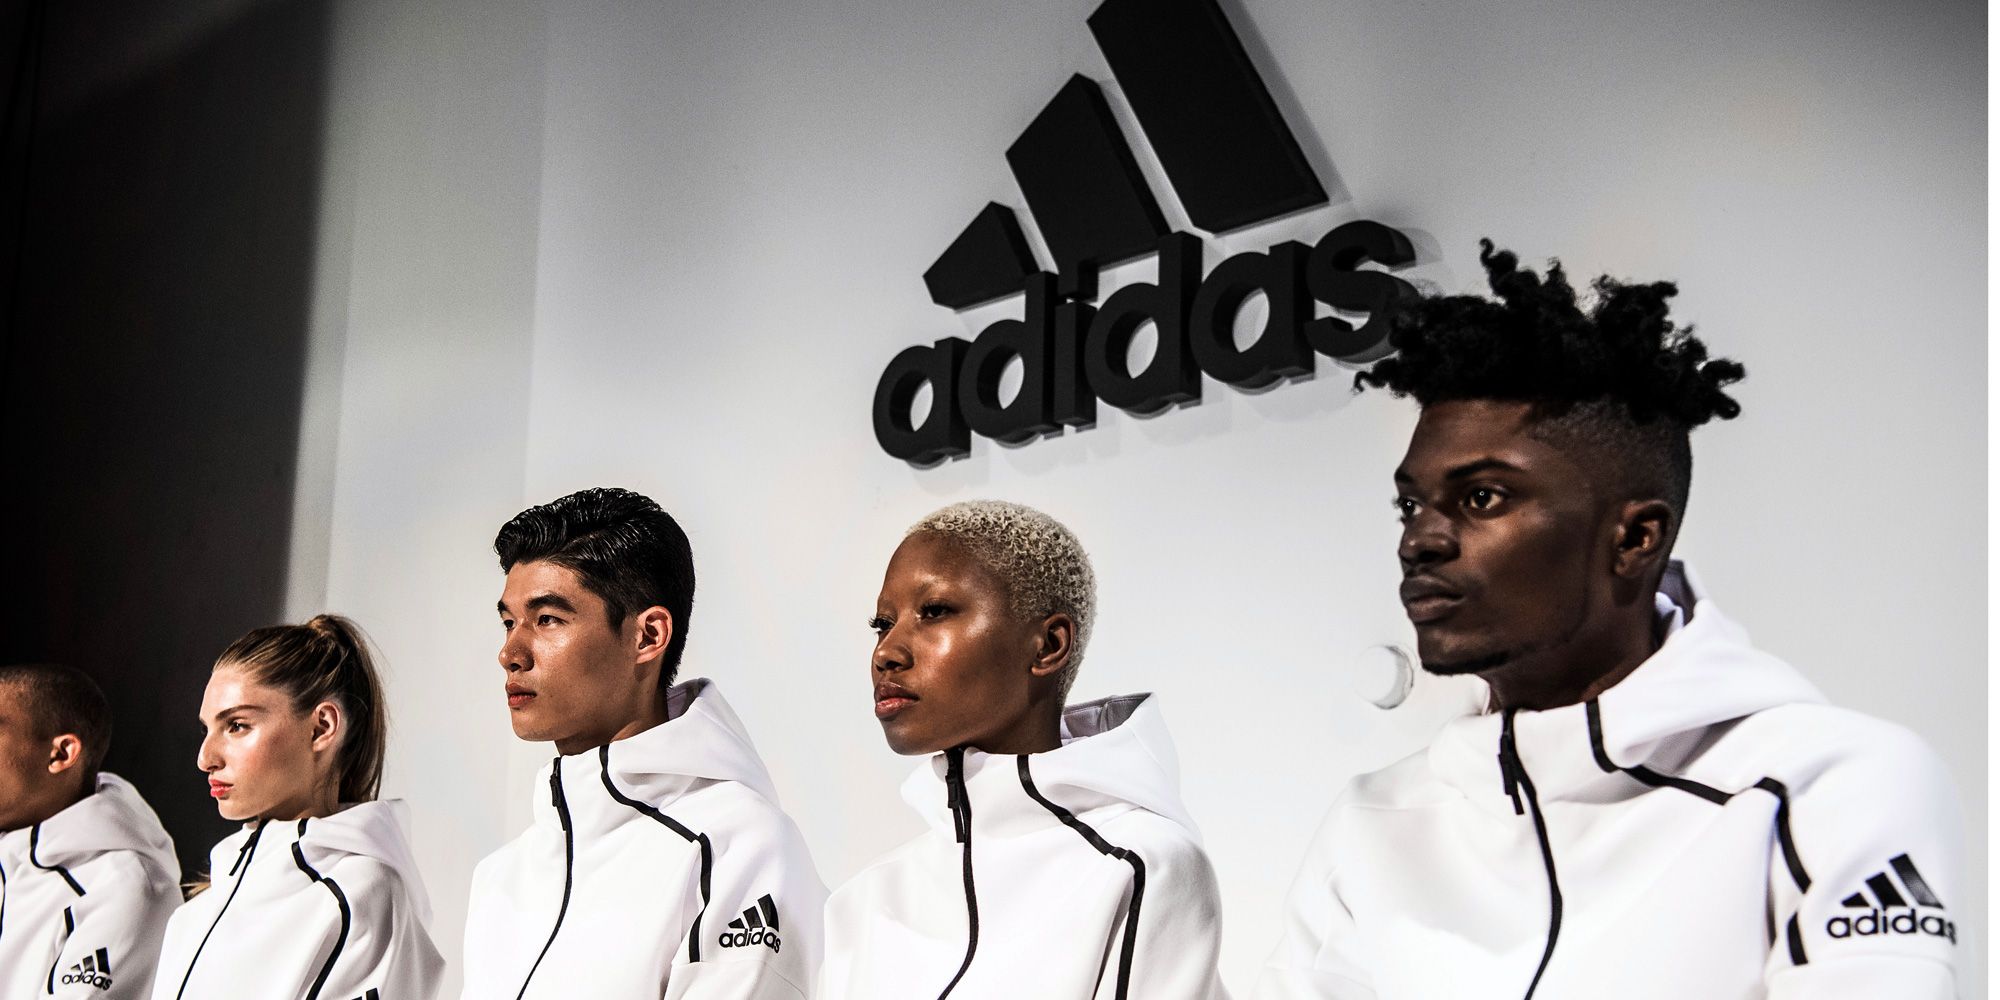 Adidas' New Clothing Blends and Performance